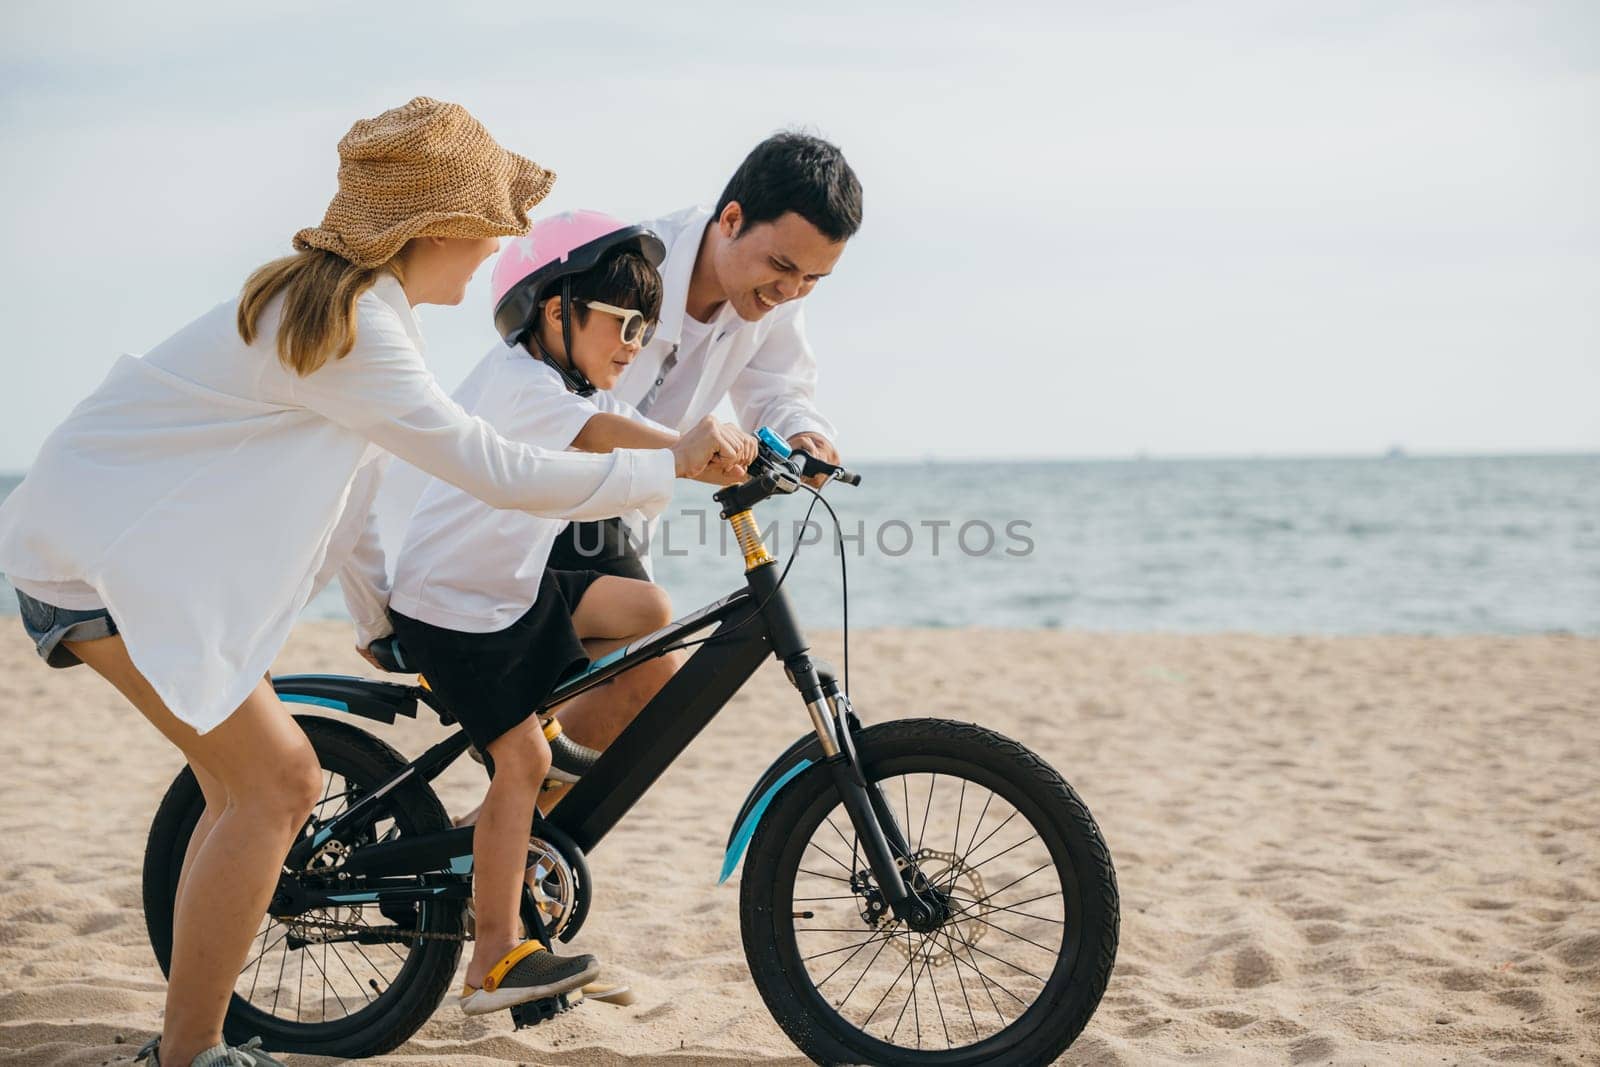 Under warm glow of summer sunset cheerful family enjoys road trip on sandy beach teaching and learning bicycle riding. Safety laughter and family love create perfect vacation concept.